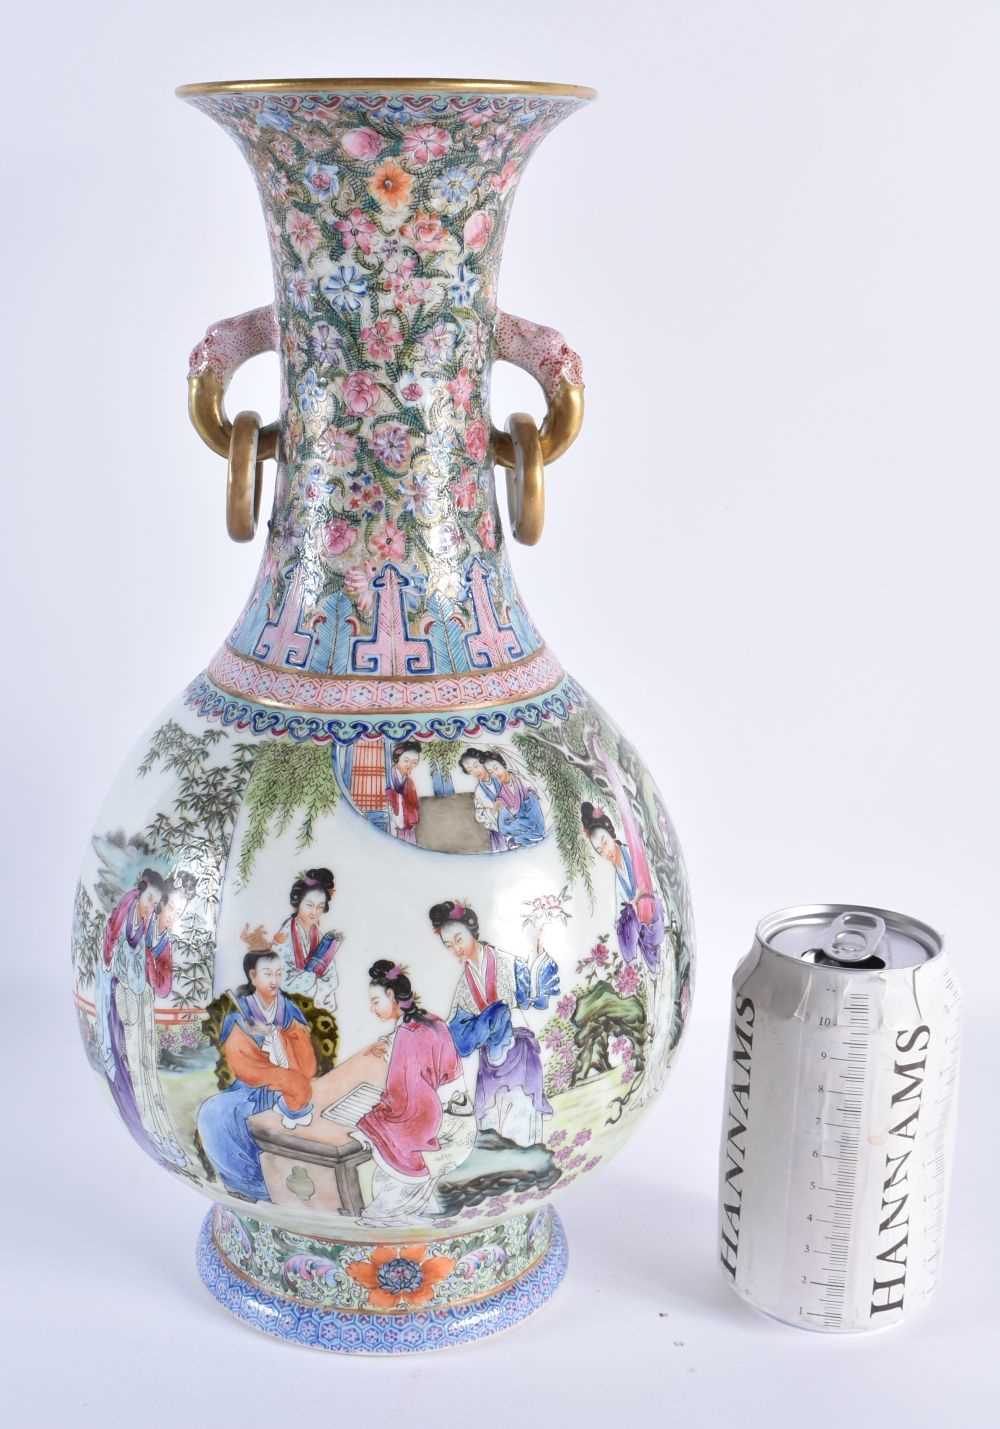 A FINE LARGE EARLY 20TH CENTURY CHINESE FAMILLE ROSE PORCELAIN TWIN HANDLED VASE Late Qing/Republic,